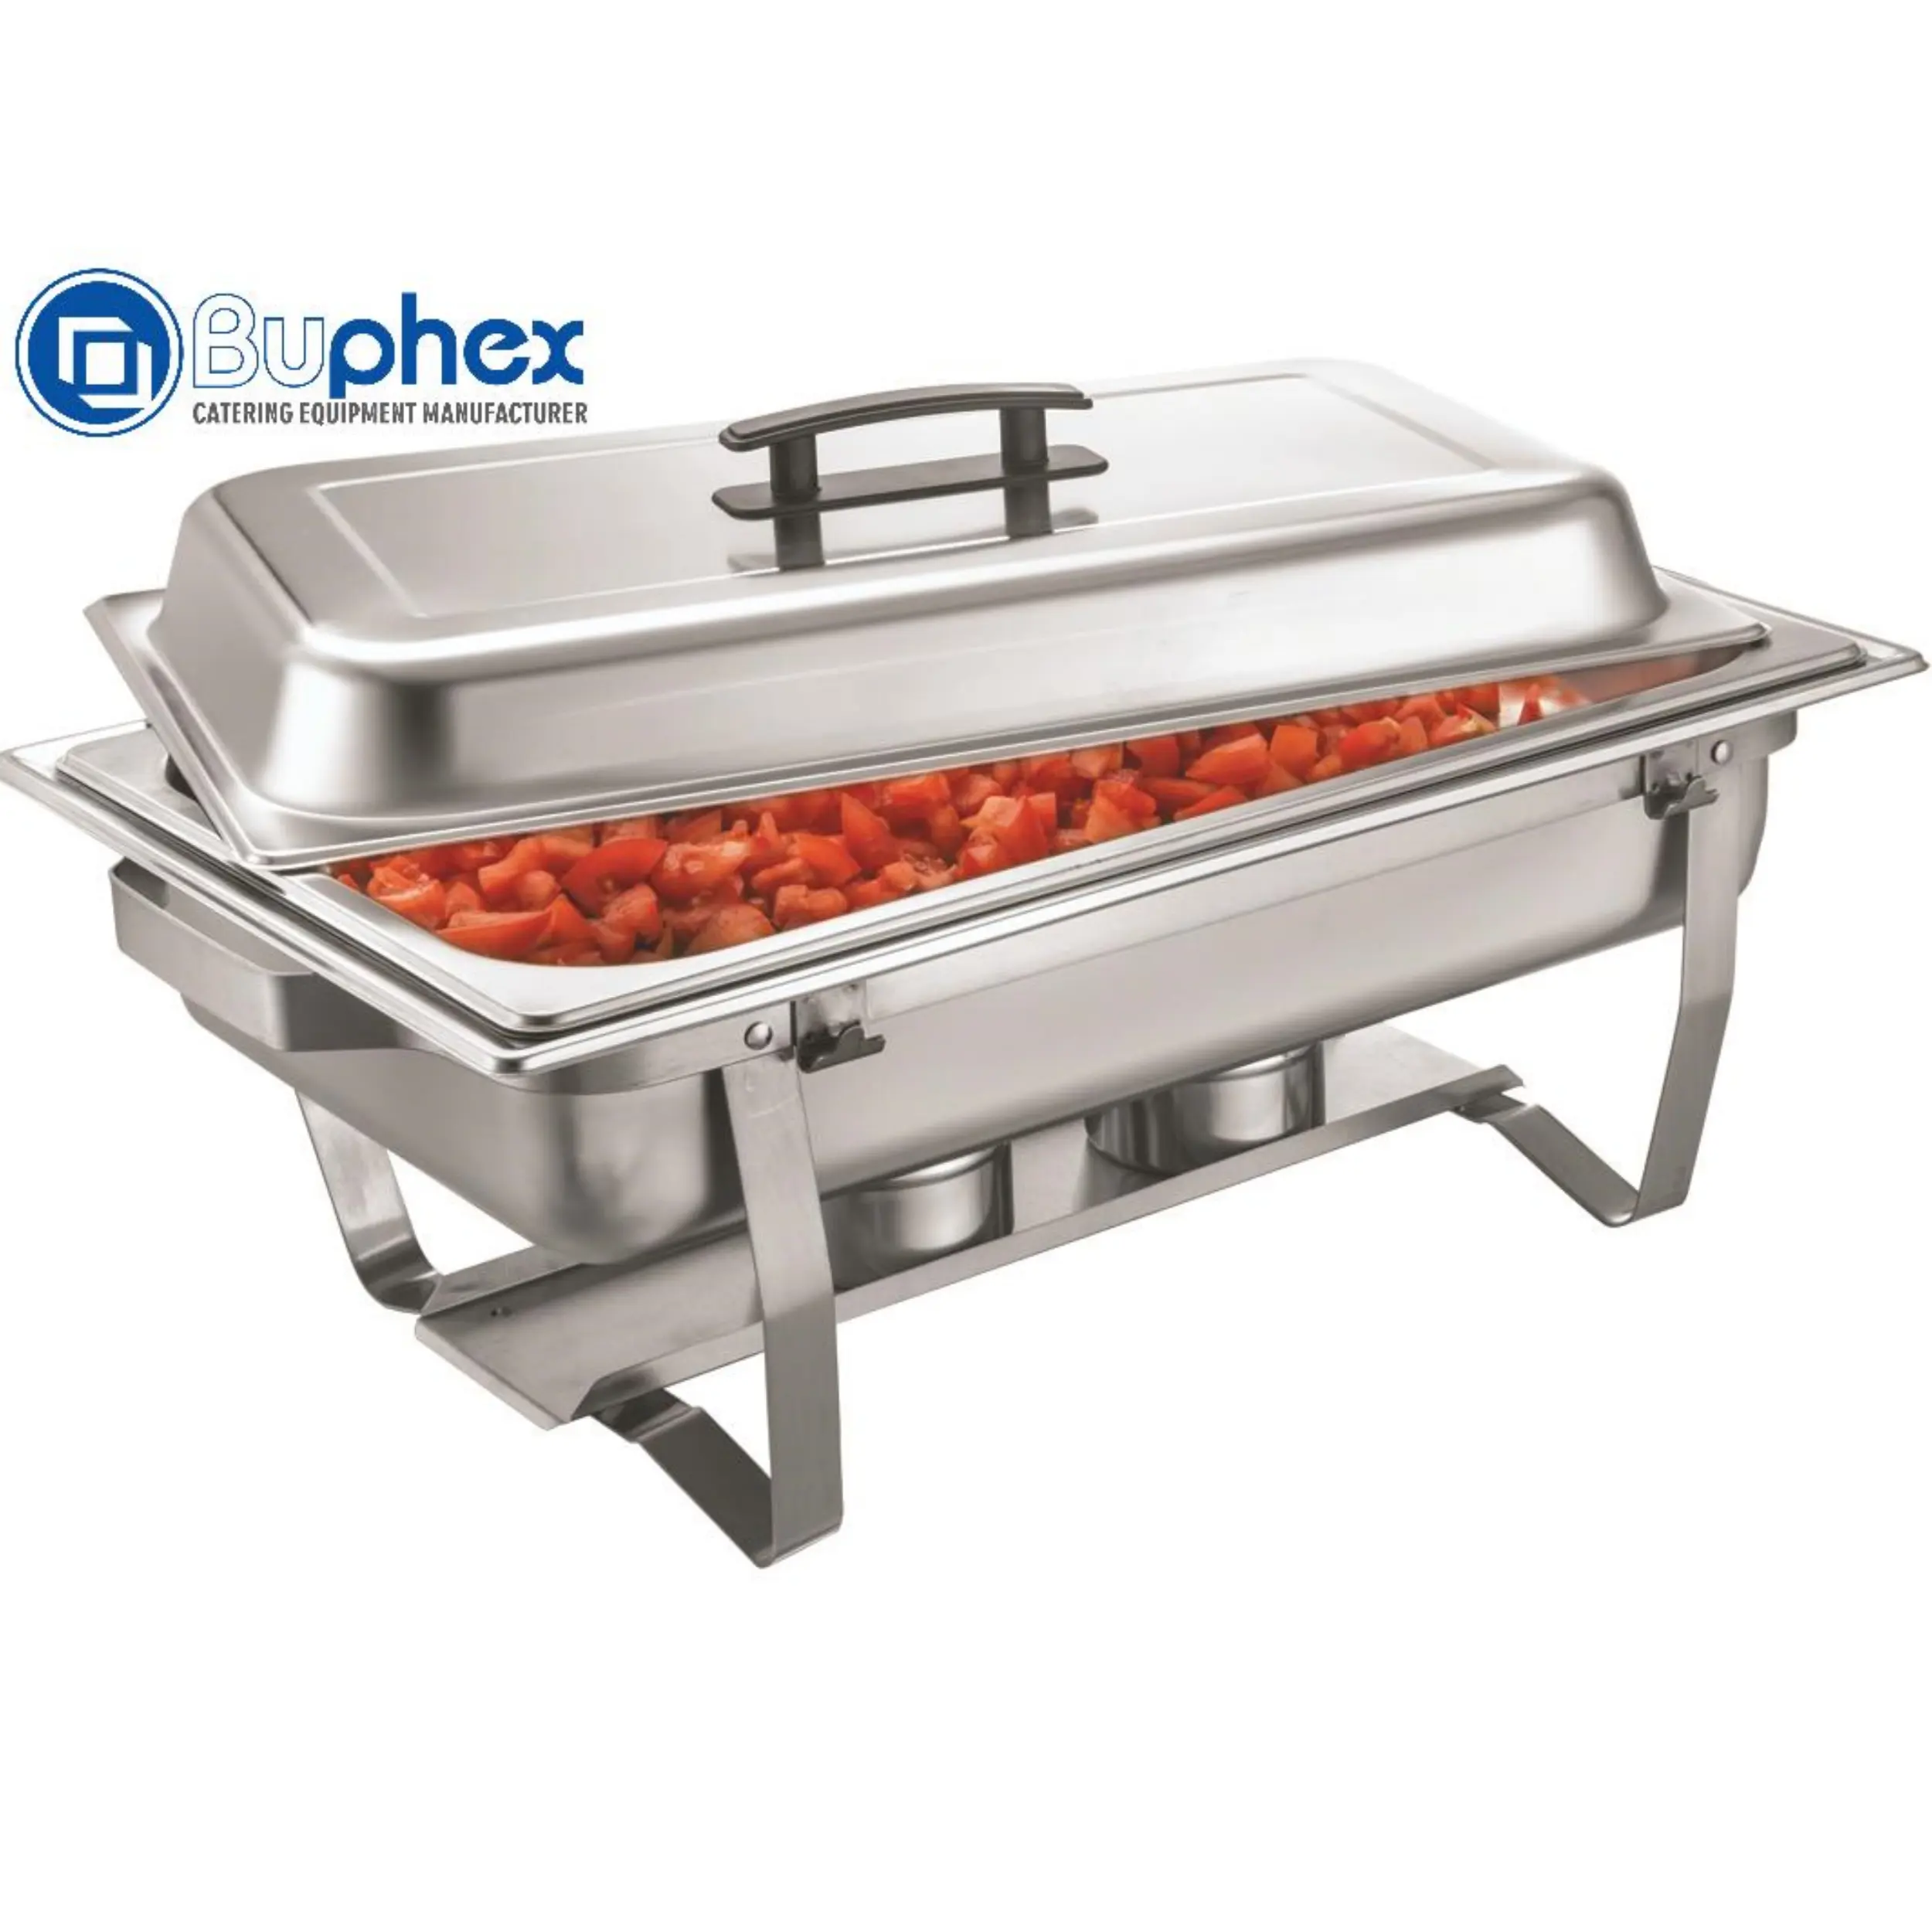 Buphex SS201 pro Catering Equipment F433-3 Economy Chafing Dish 7.5L with GN1/3x3 Food warmer for hotel  Restaurant  catering